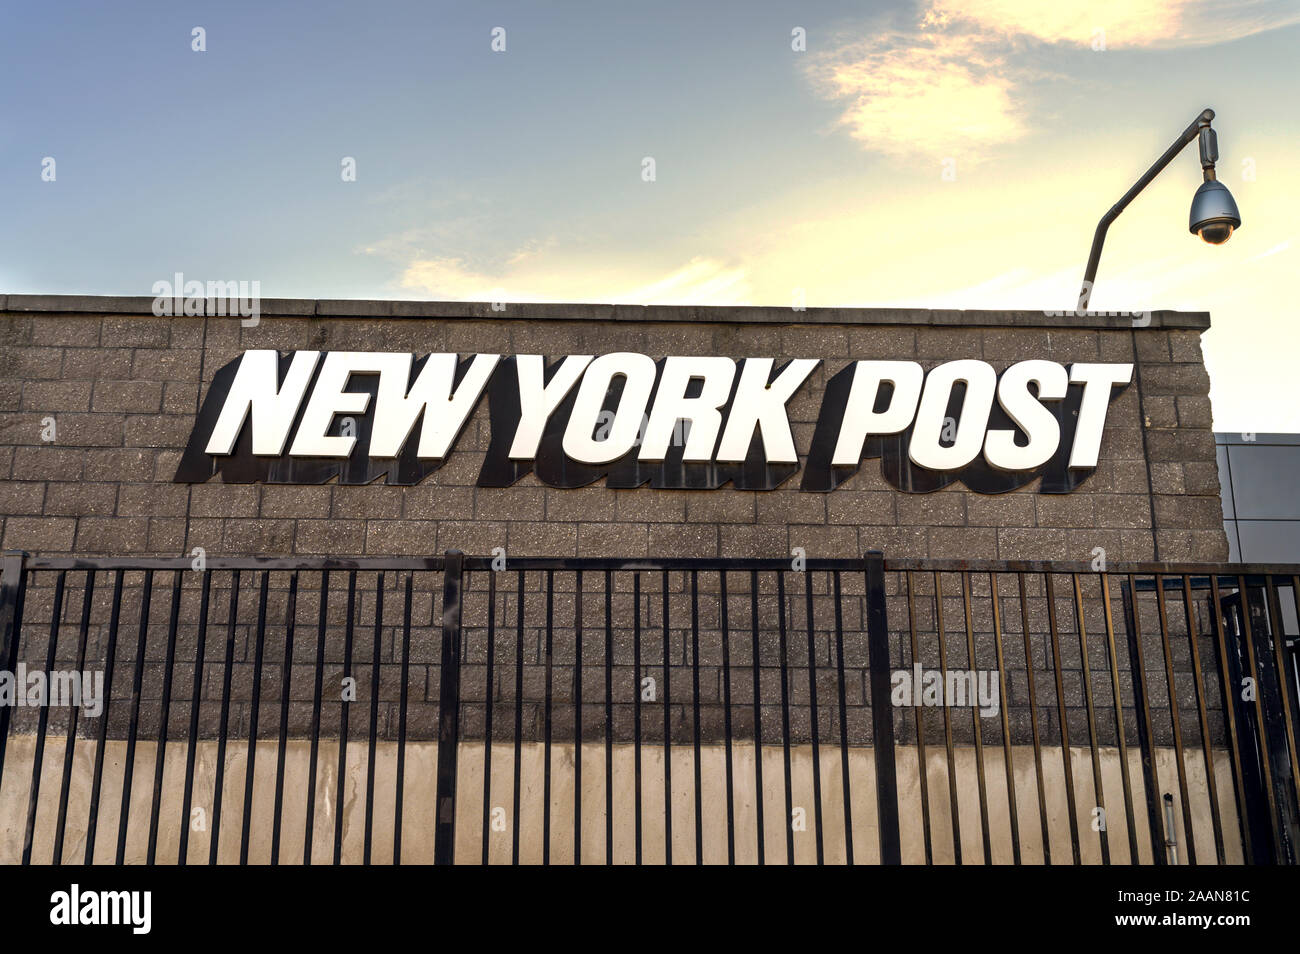 Bronx, NY/USA - 11/09/2019: The New York Post Building on East 132nd Street in the Bronx Stock Photo